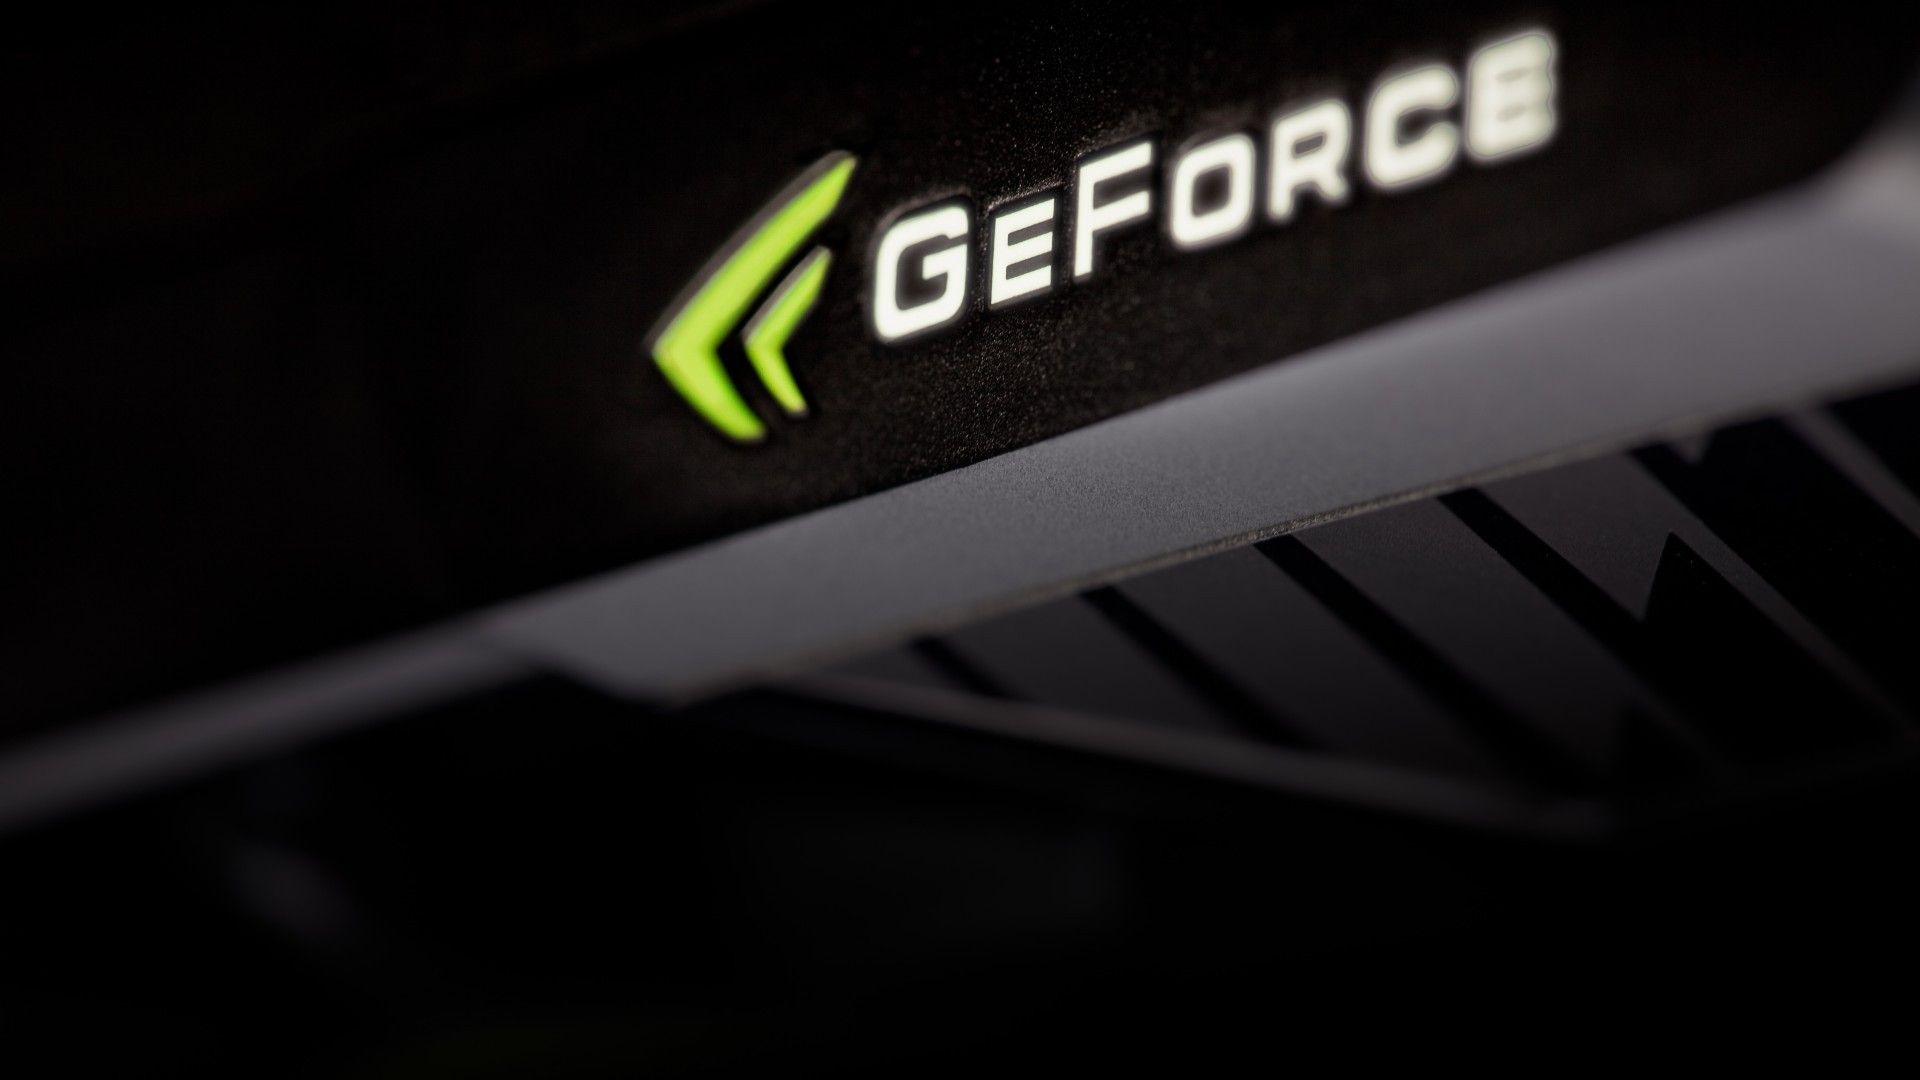 Download Nvidia Geforce Wallpaper 3479 1920x1080 px High resolution